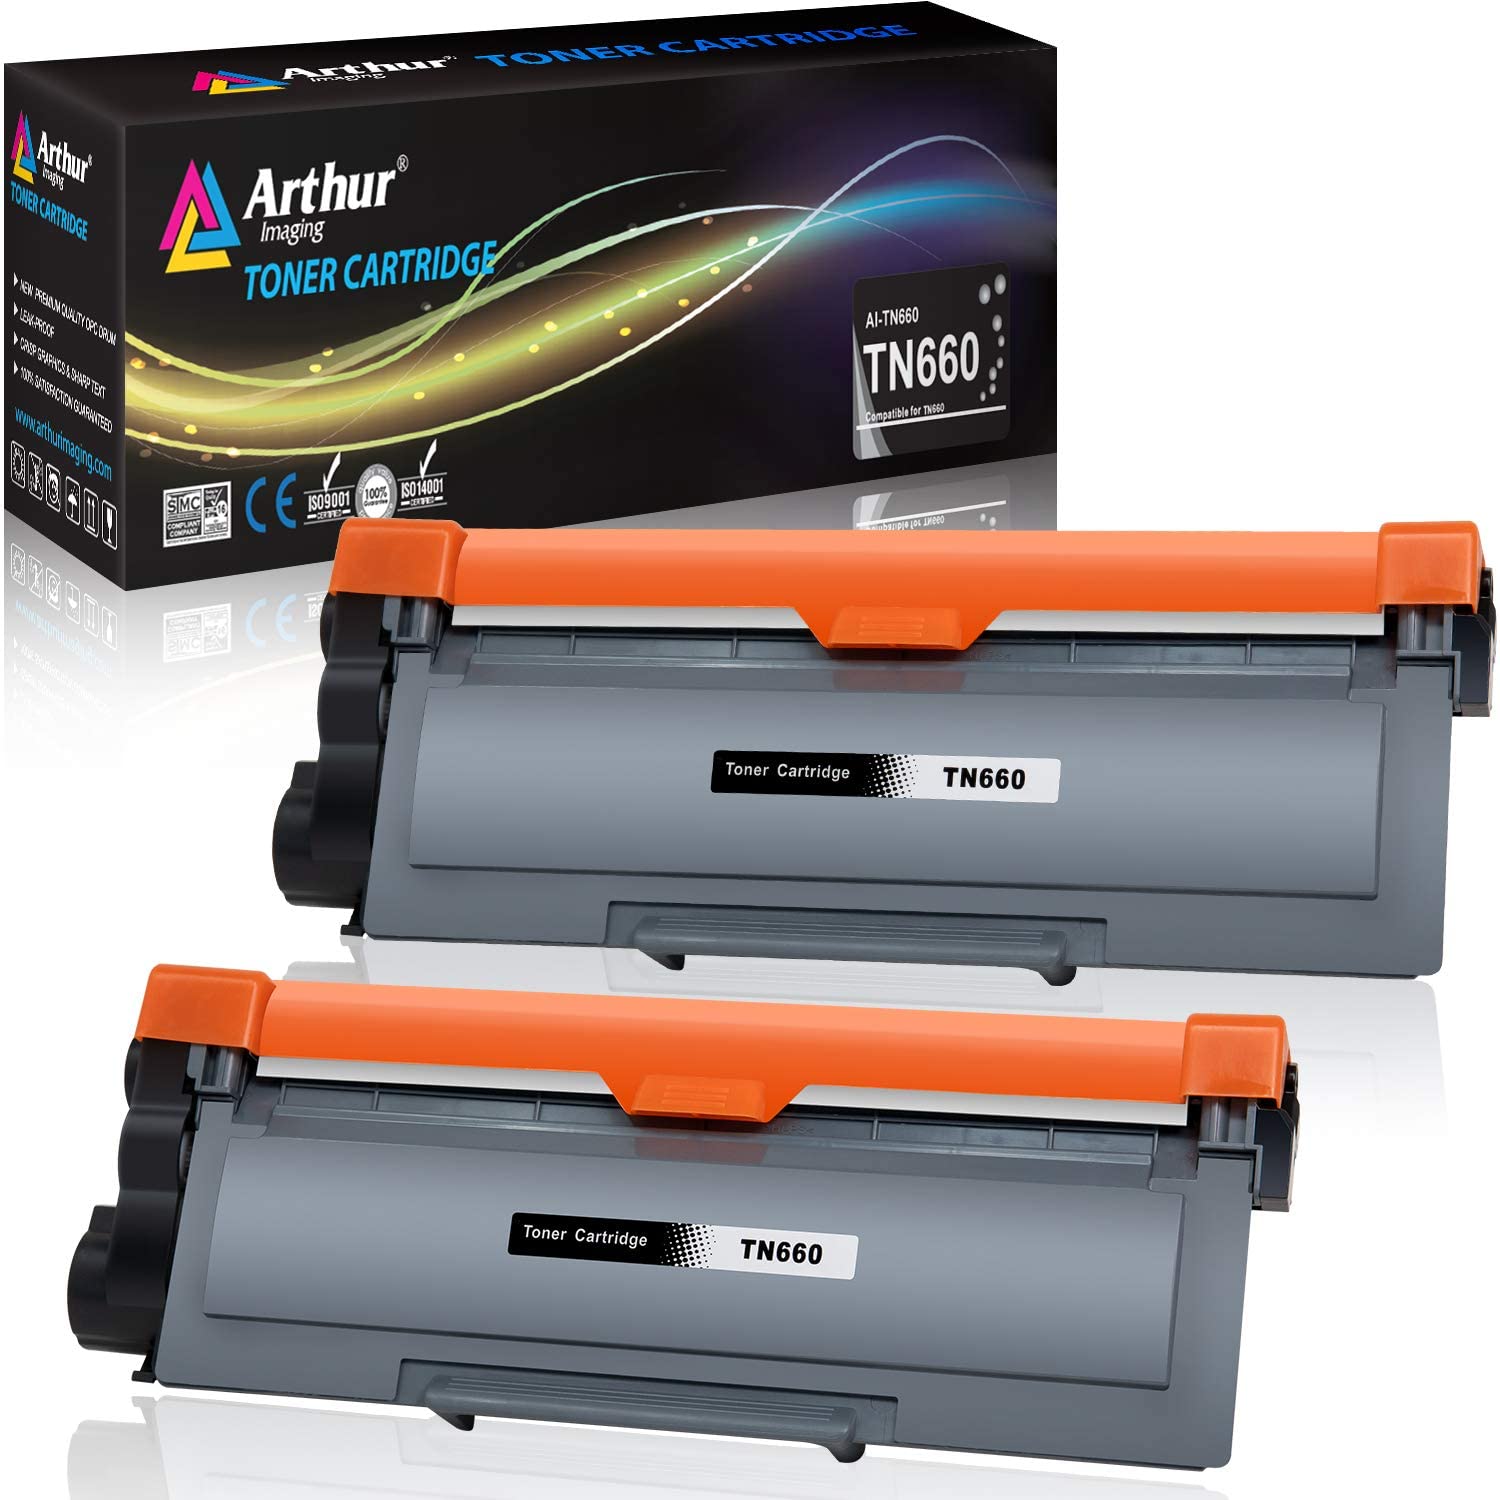 Arthur Imaging Compatible Toner Cartridge Replacement for Brother TN630 TN660 (Black, 2 Pack)